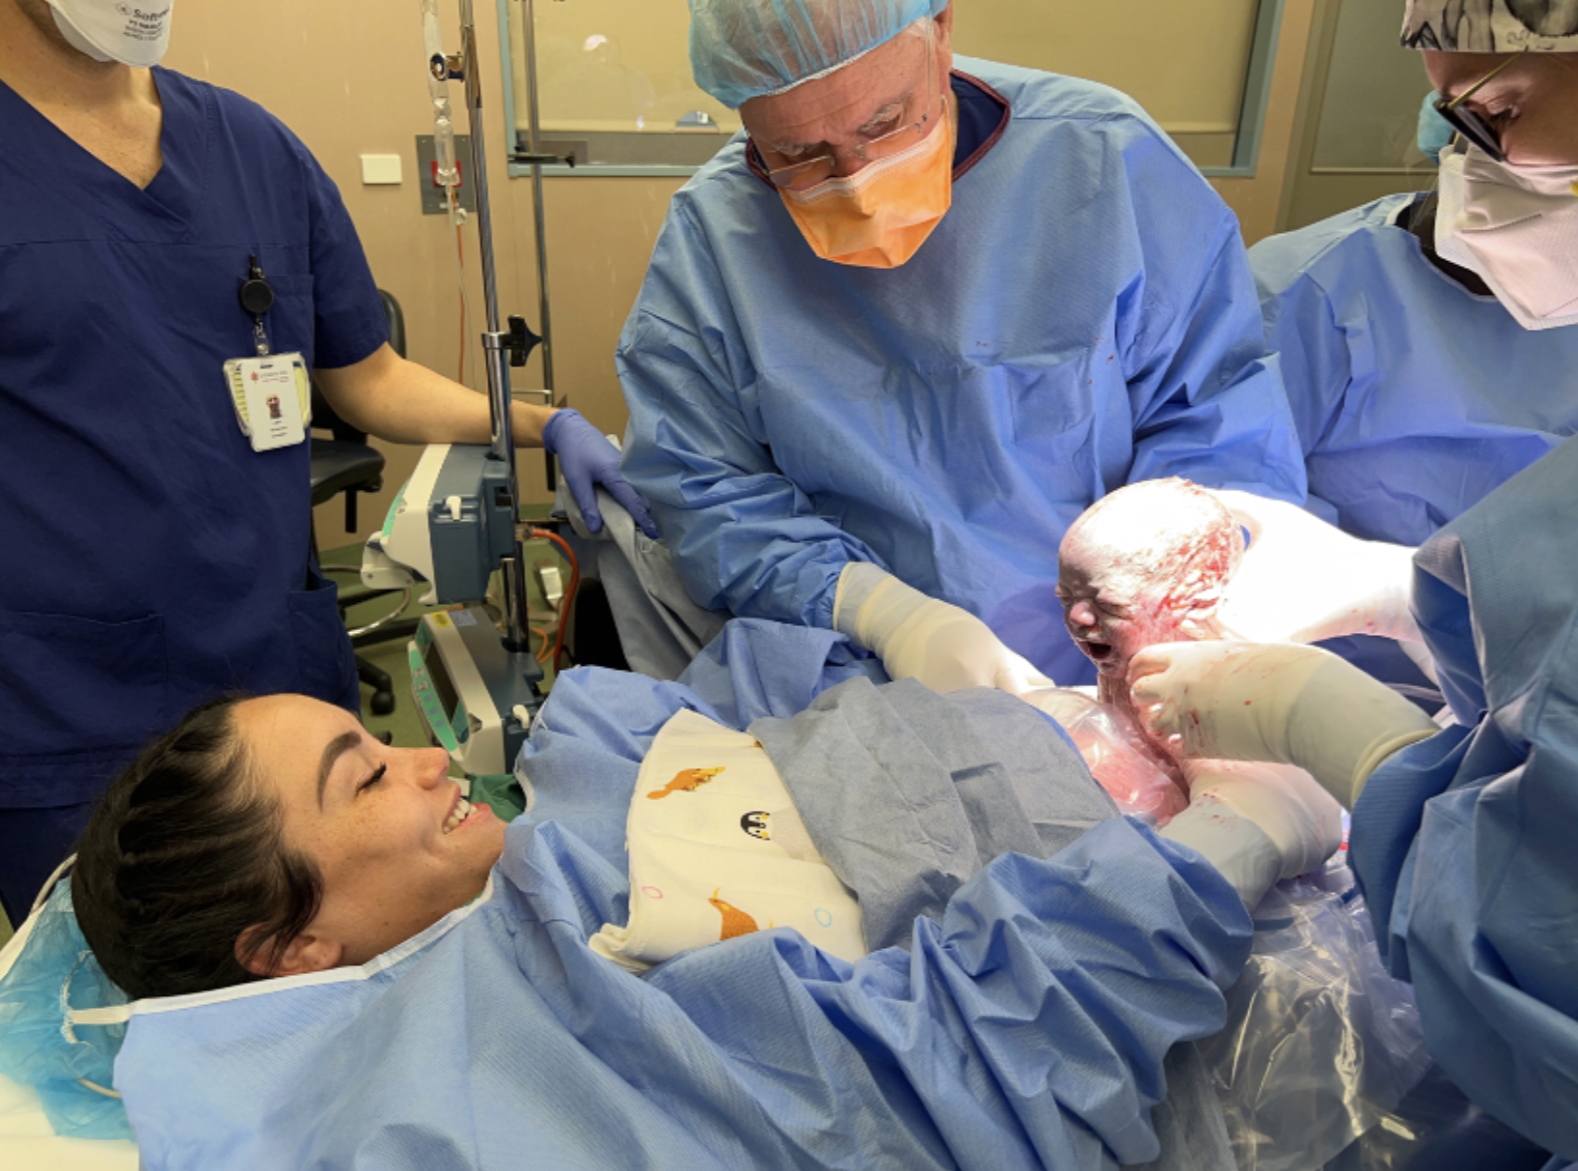 Rebecca Hamilton meets her baby after a successful maternally assisted caesarean.